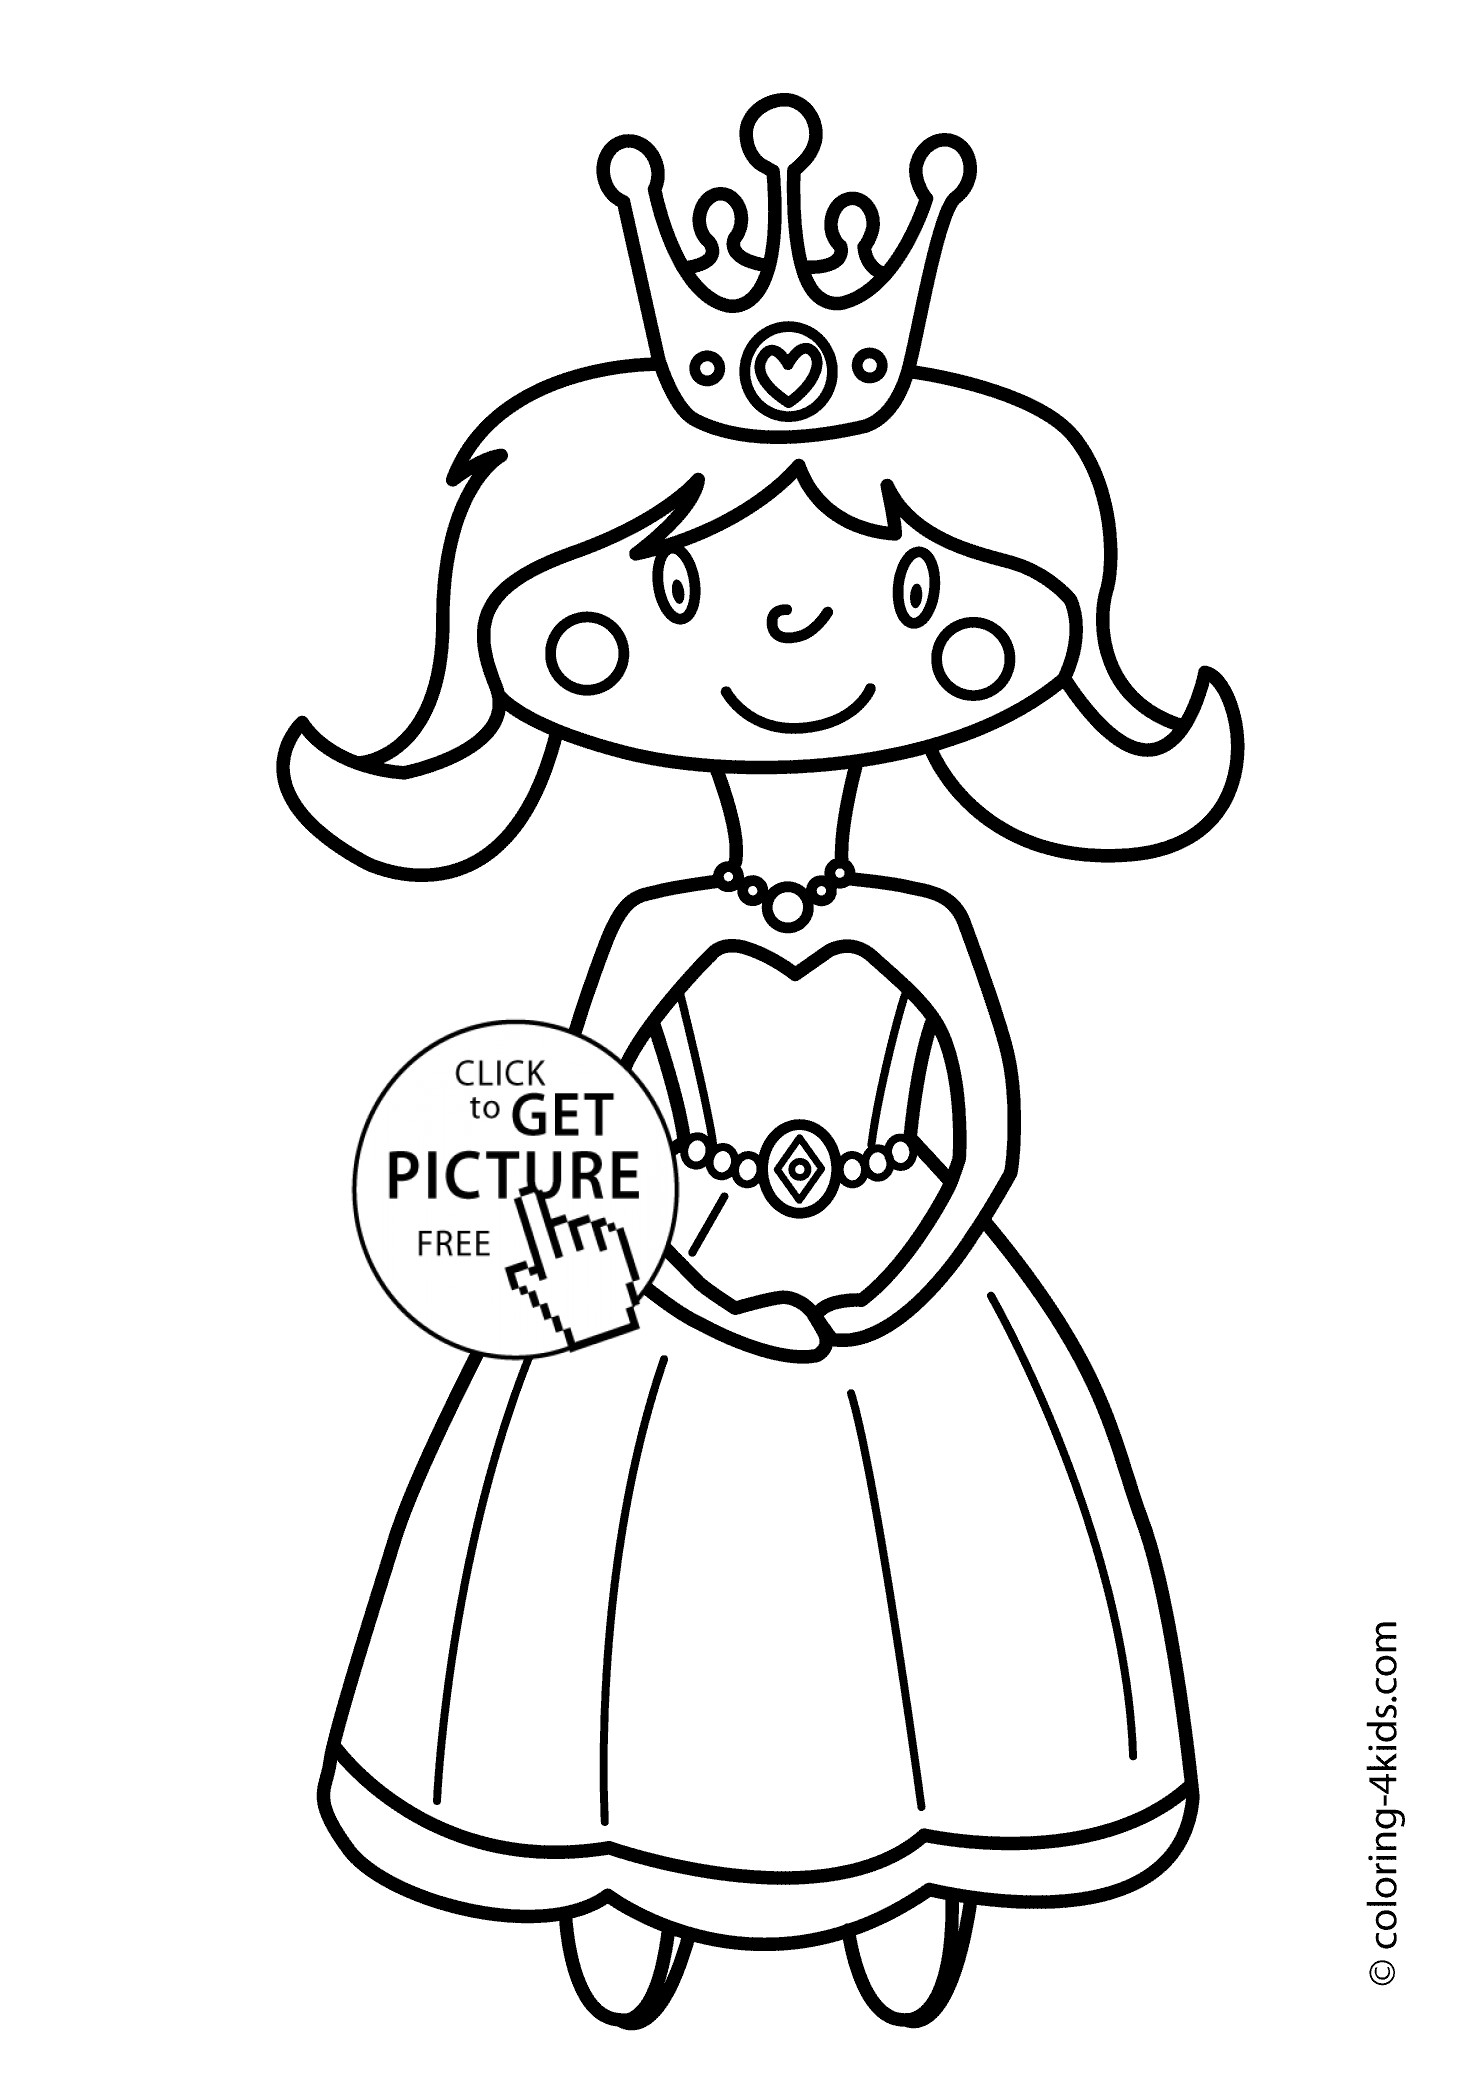 Fun Coloring Pages For Girls
 Cute Princesse Coloring pages for girls printable